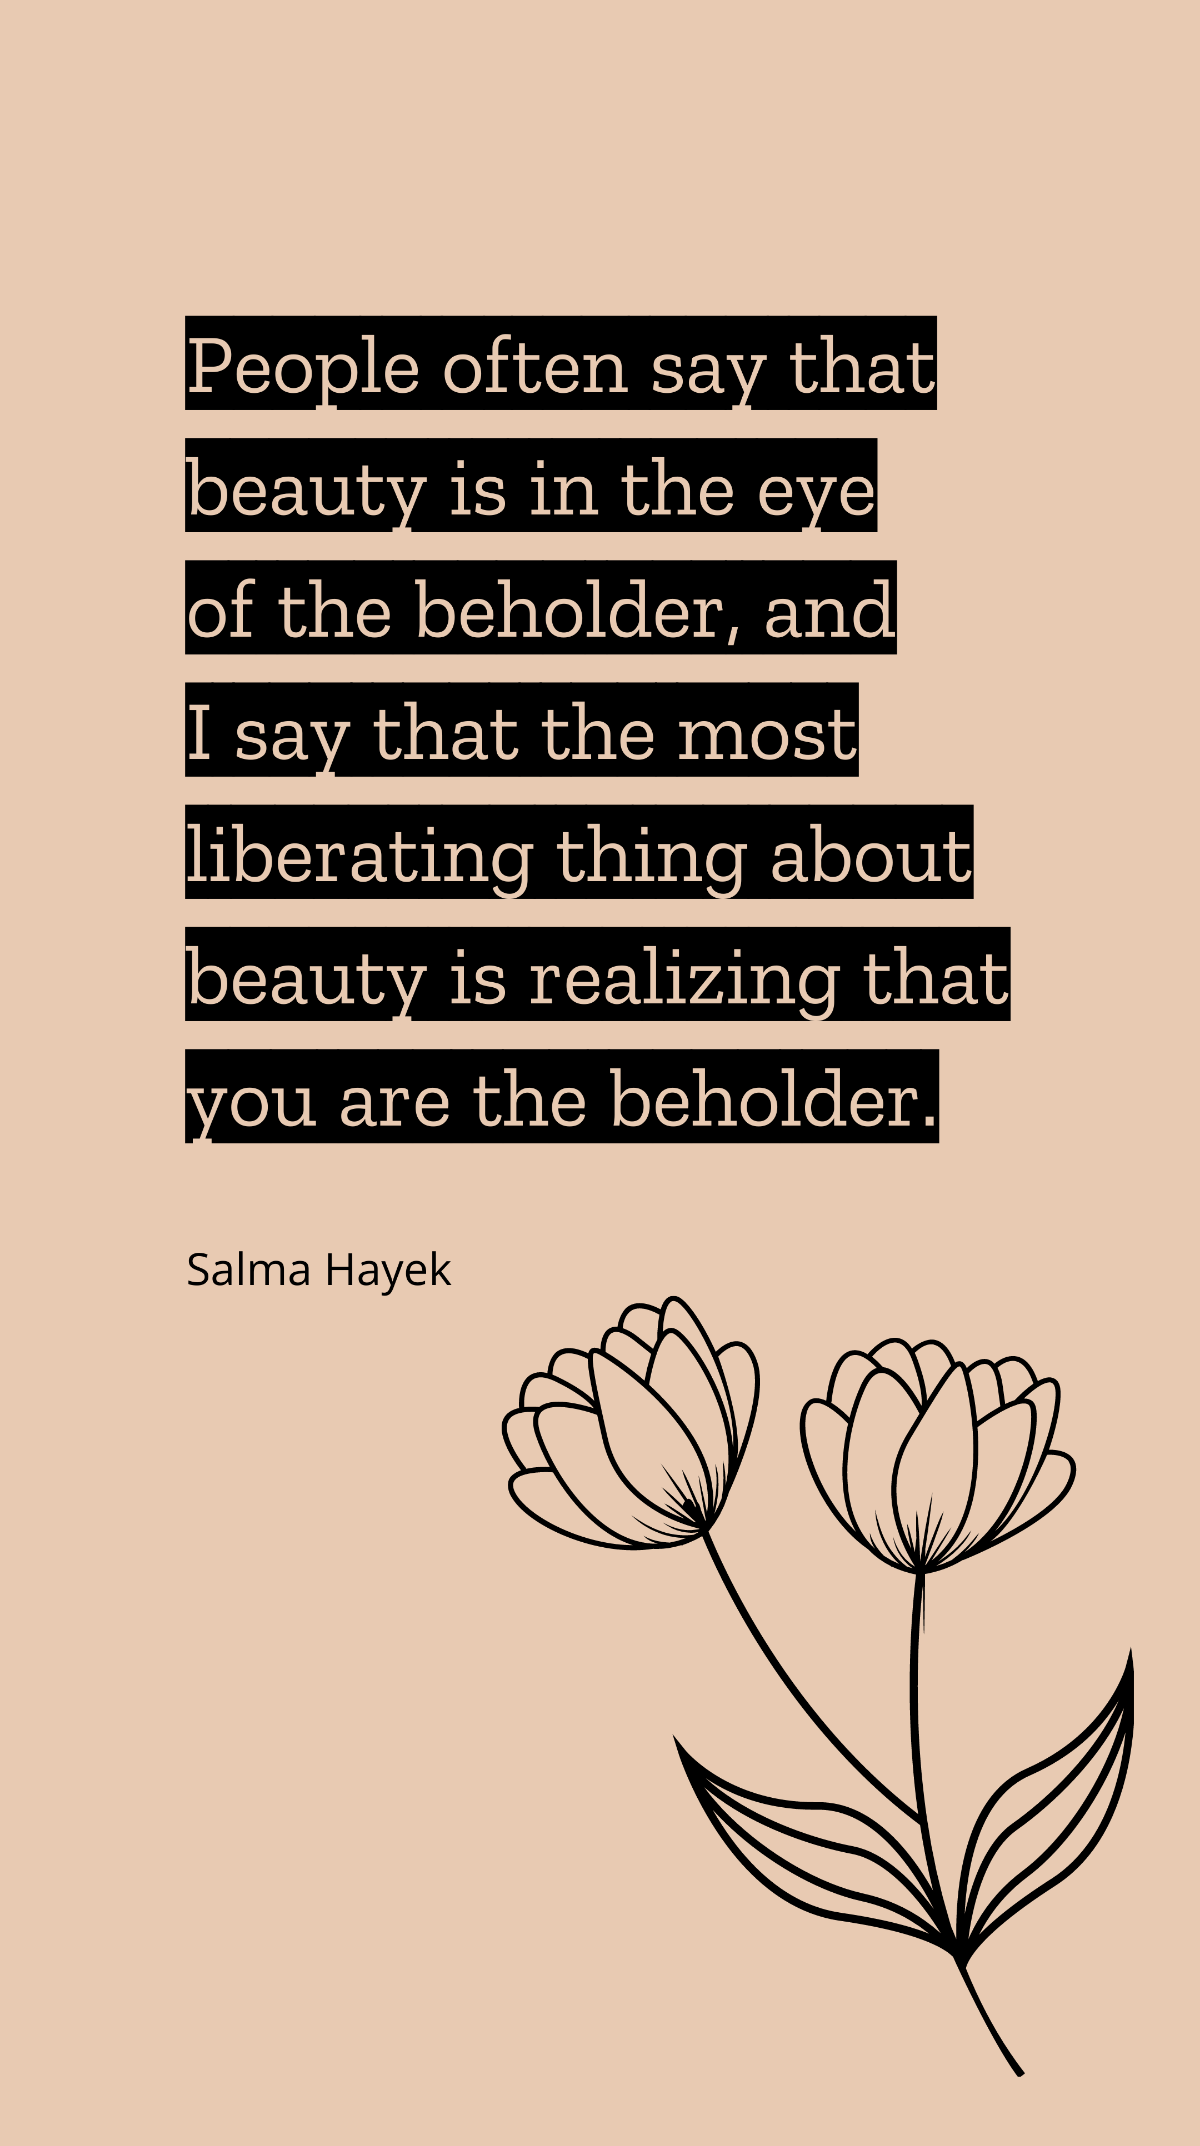 Salma Hayek - People often say that beauty is in the eye of the beholder, and I say that the most liberating thing about beauty is realizing that you are the beholder. Template